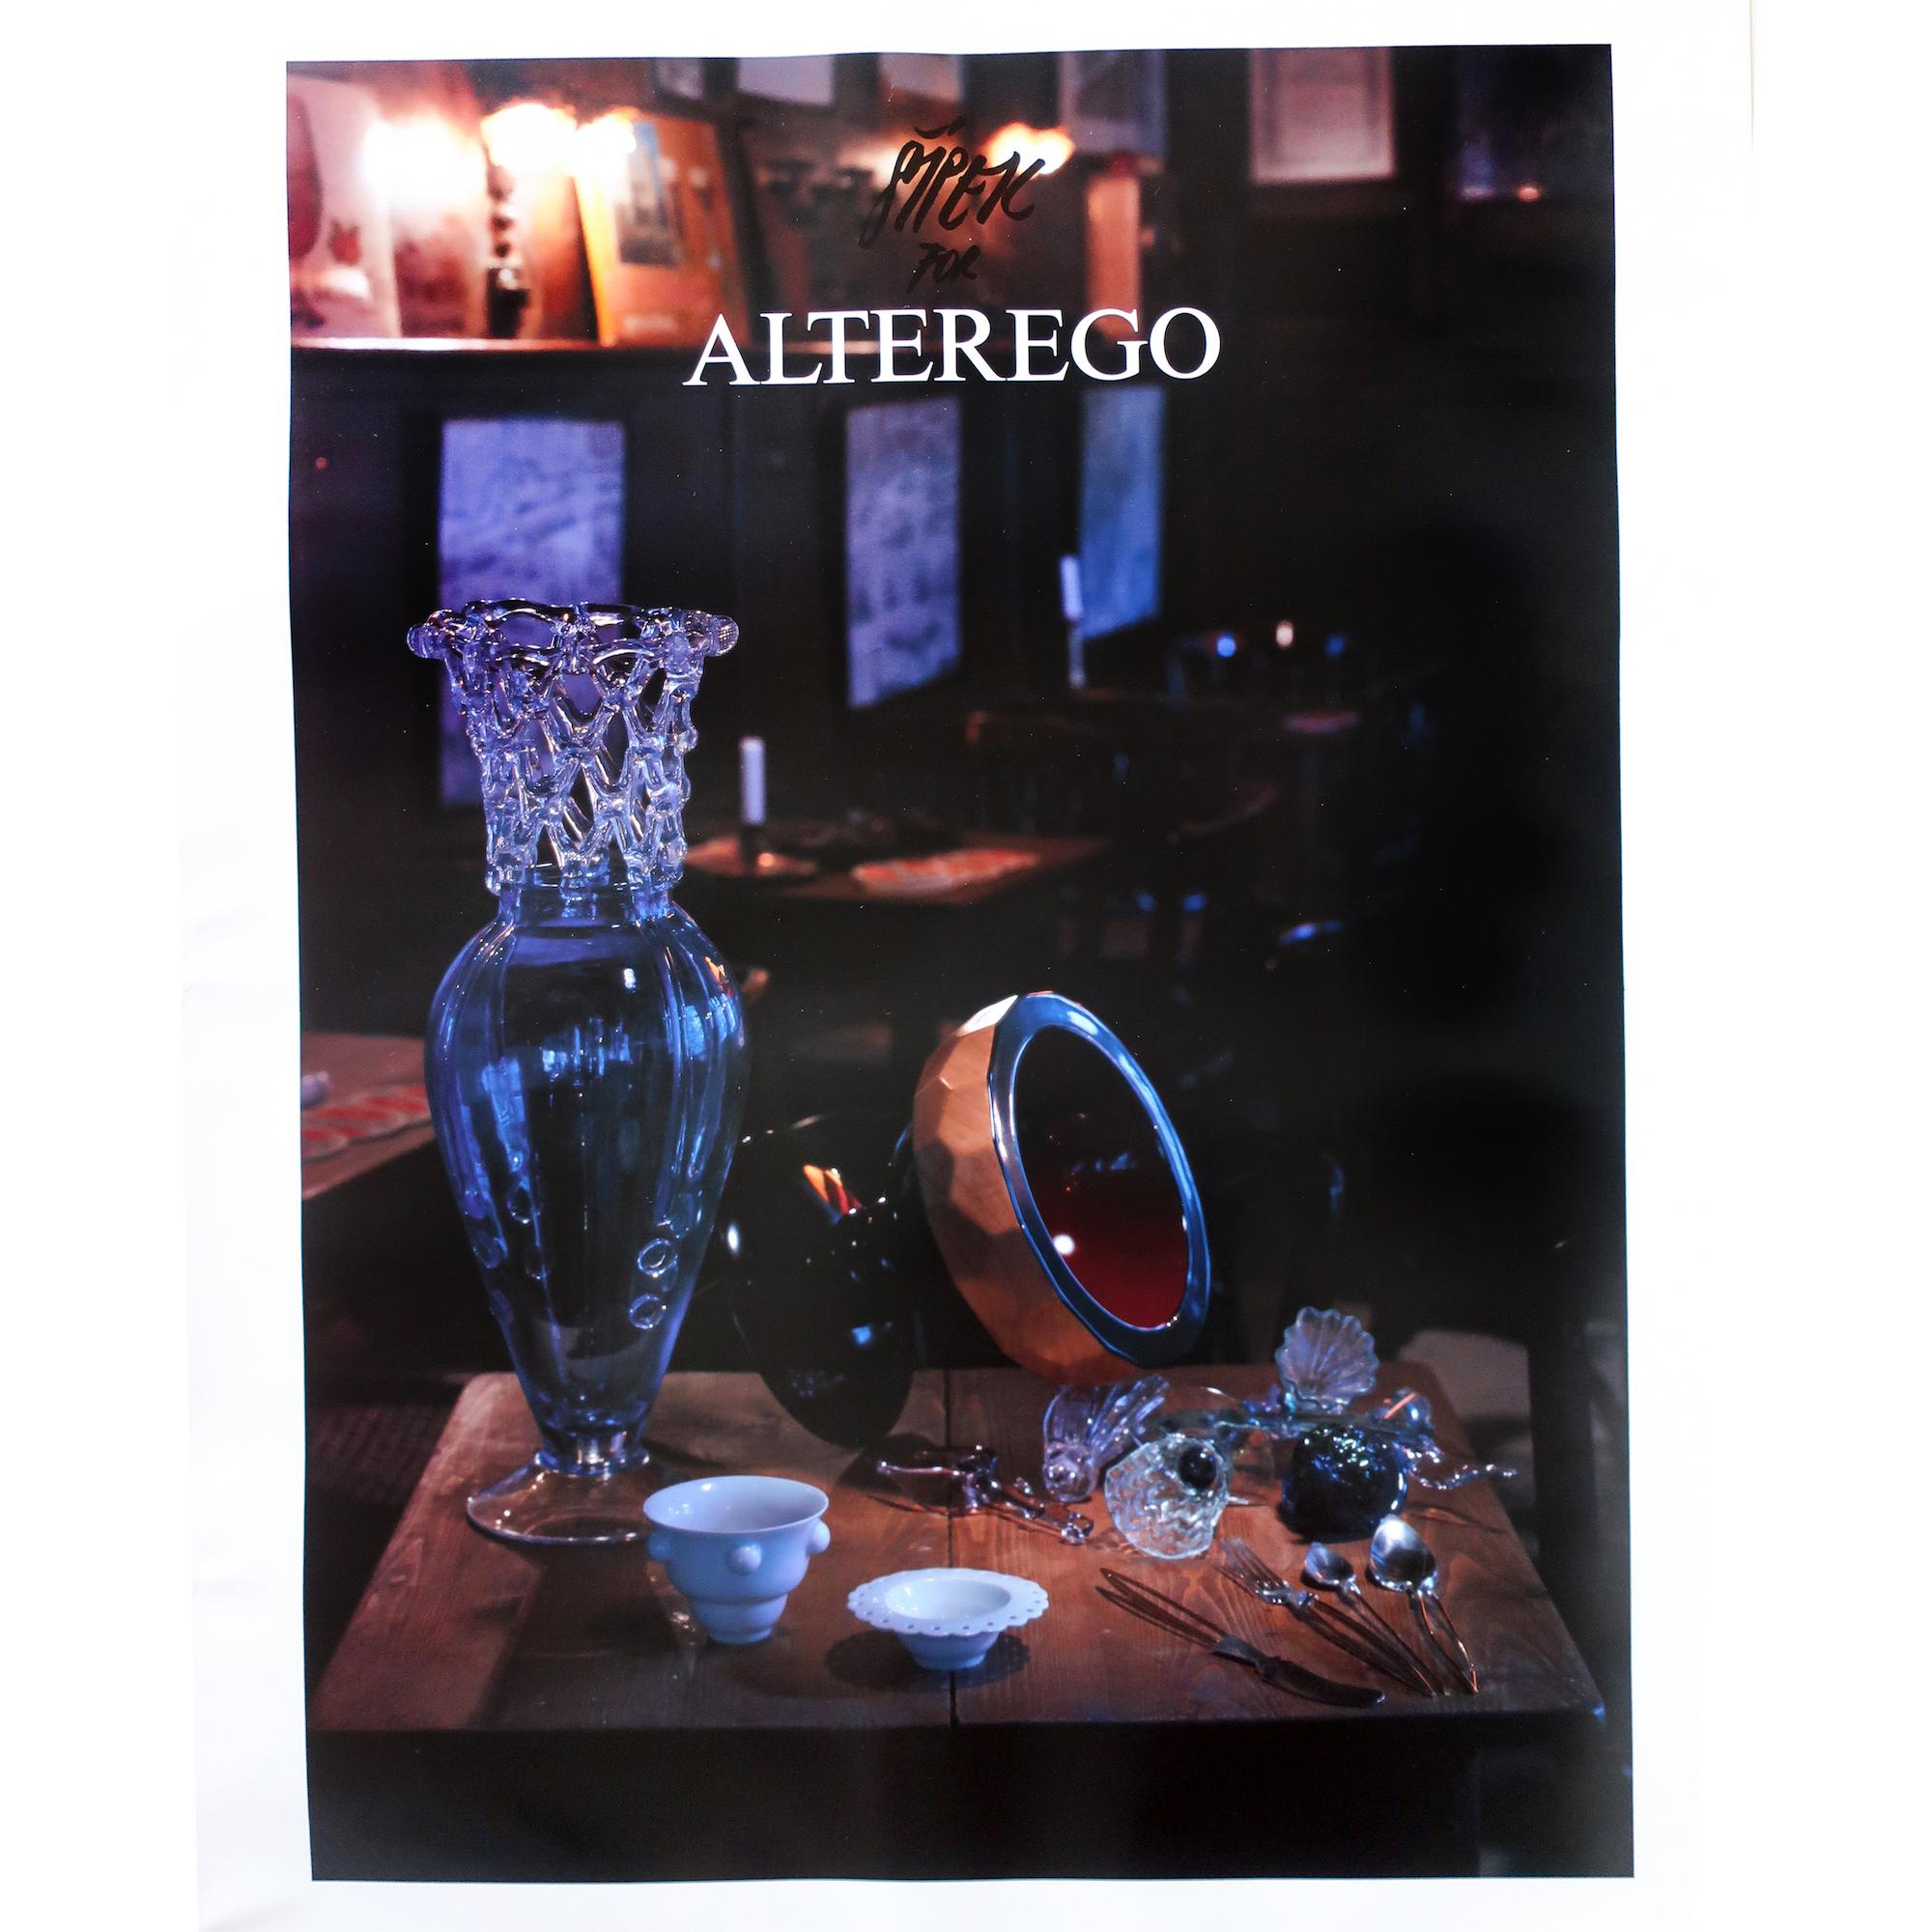 A promotional poster for Czech architect and designer Borek Sipek's work with his design studio Alterego producing works in glass in the 1980s and 1990s. Features a number of Sipek designed pieces on a wood table.